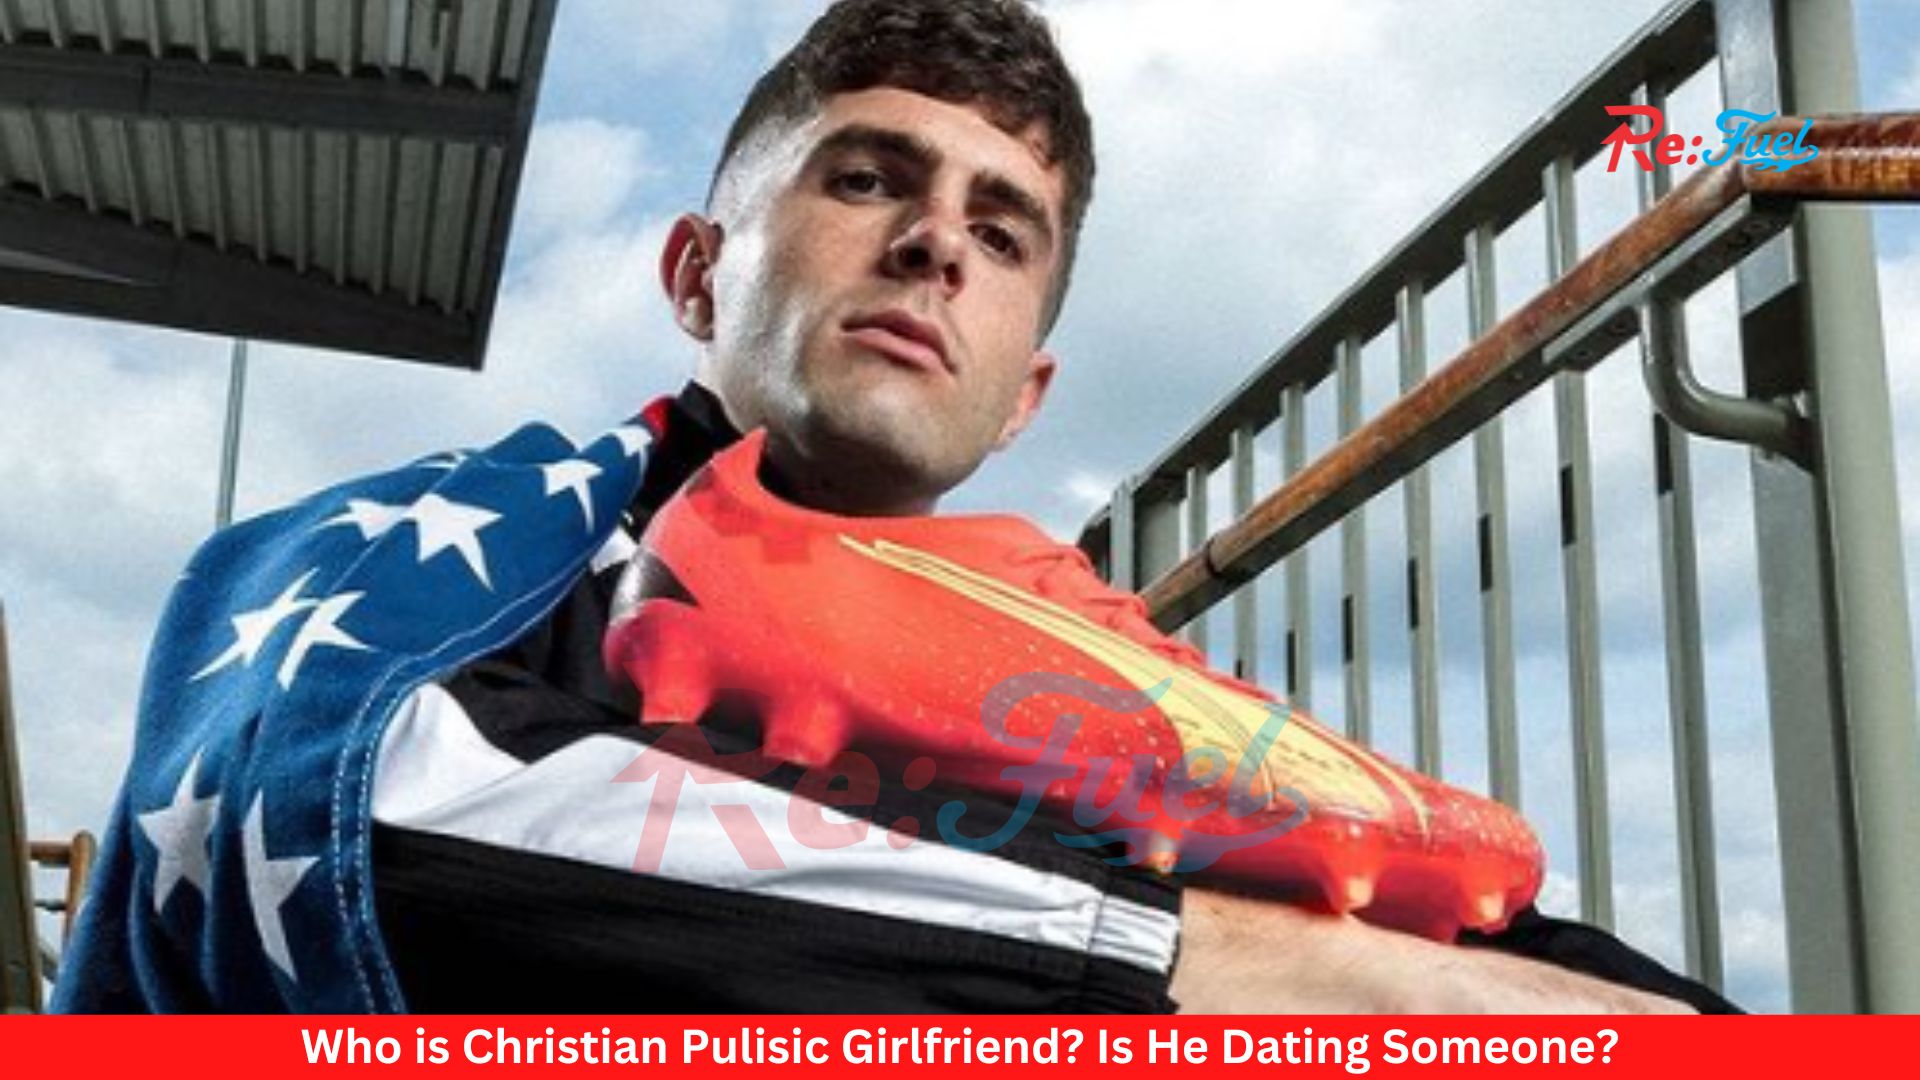 Who is Christian Pulisic Girlfriend? Is He Dating Someone?